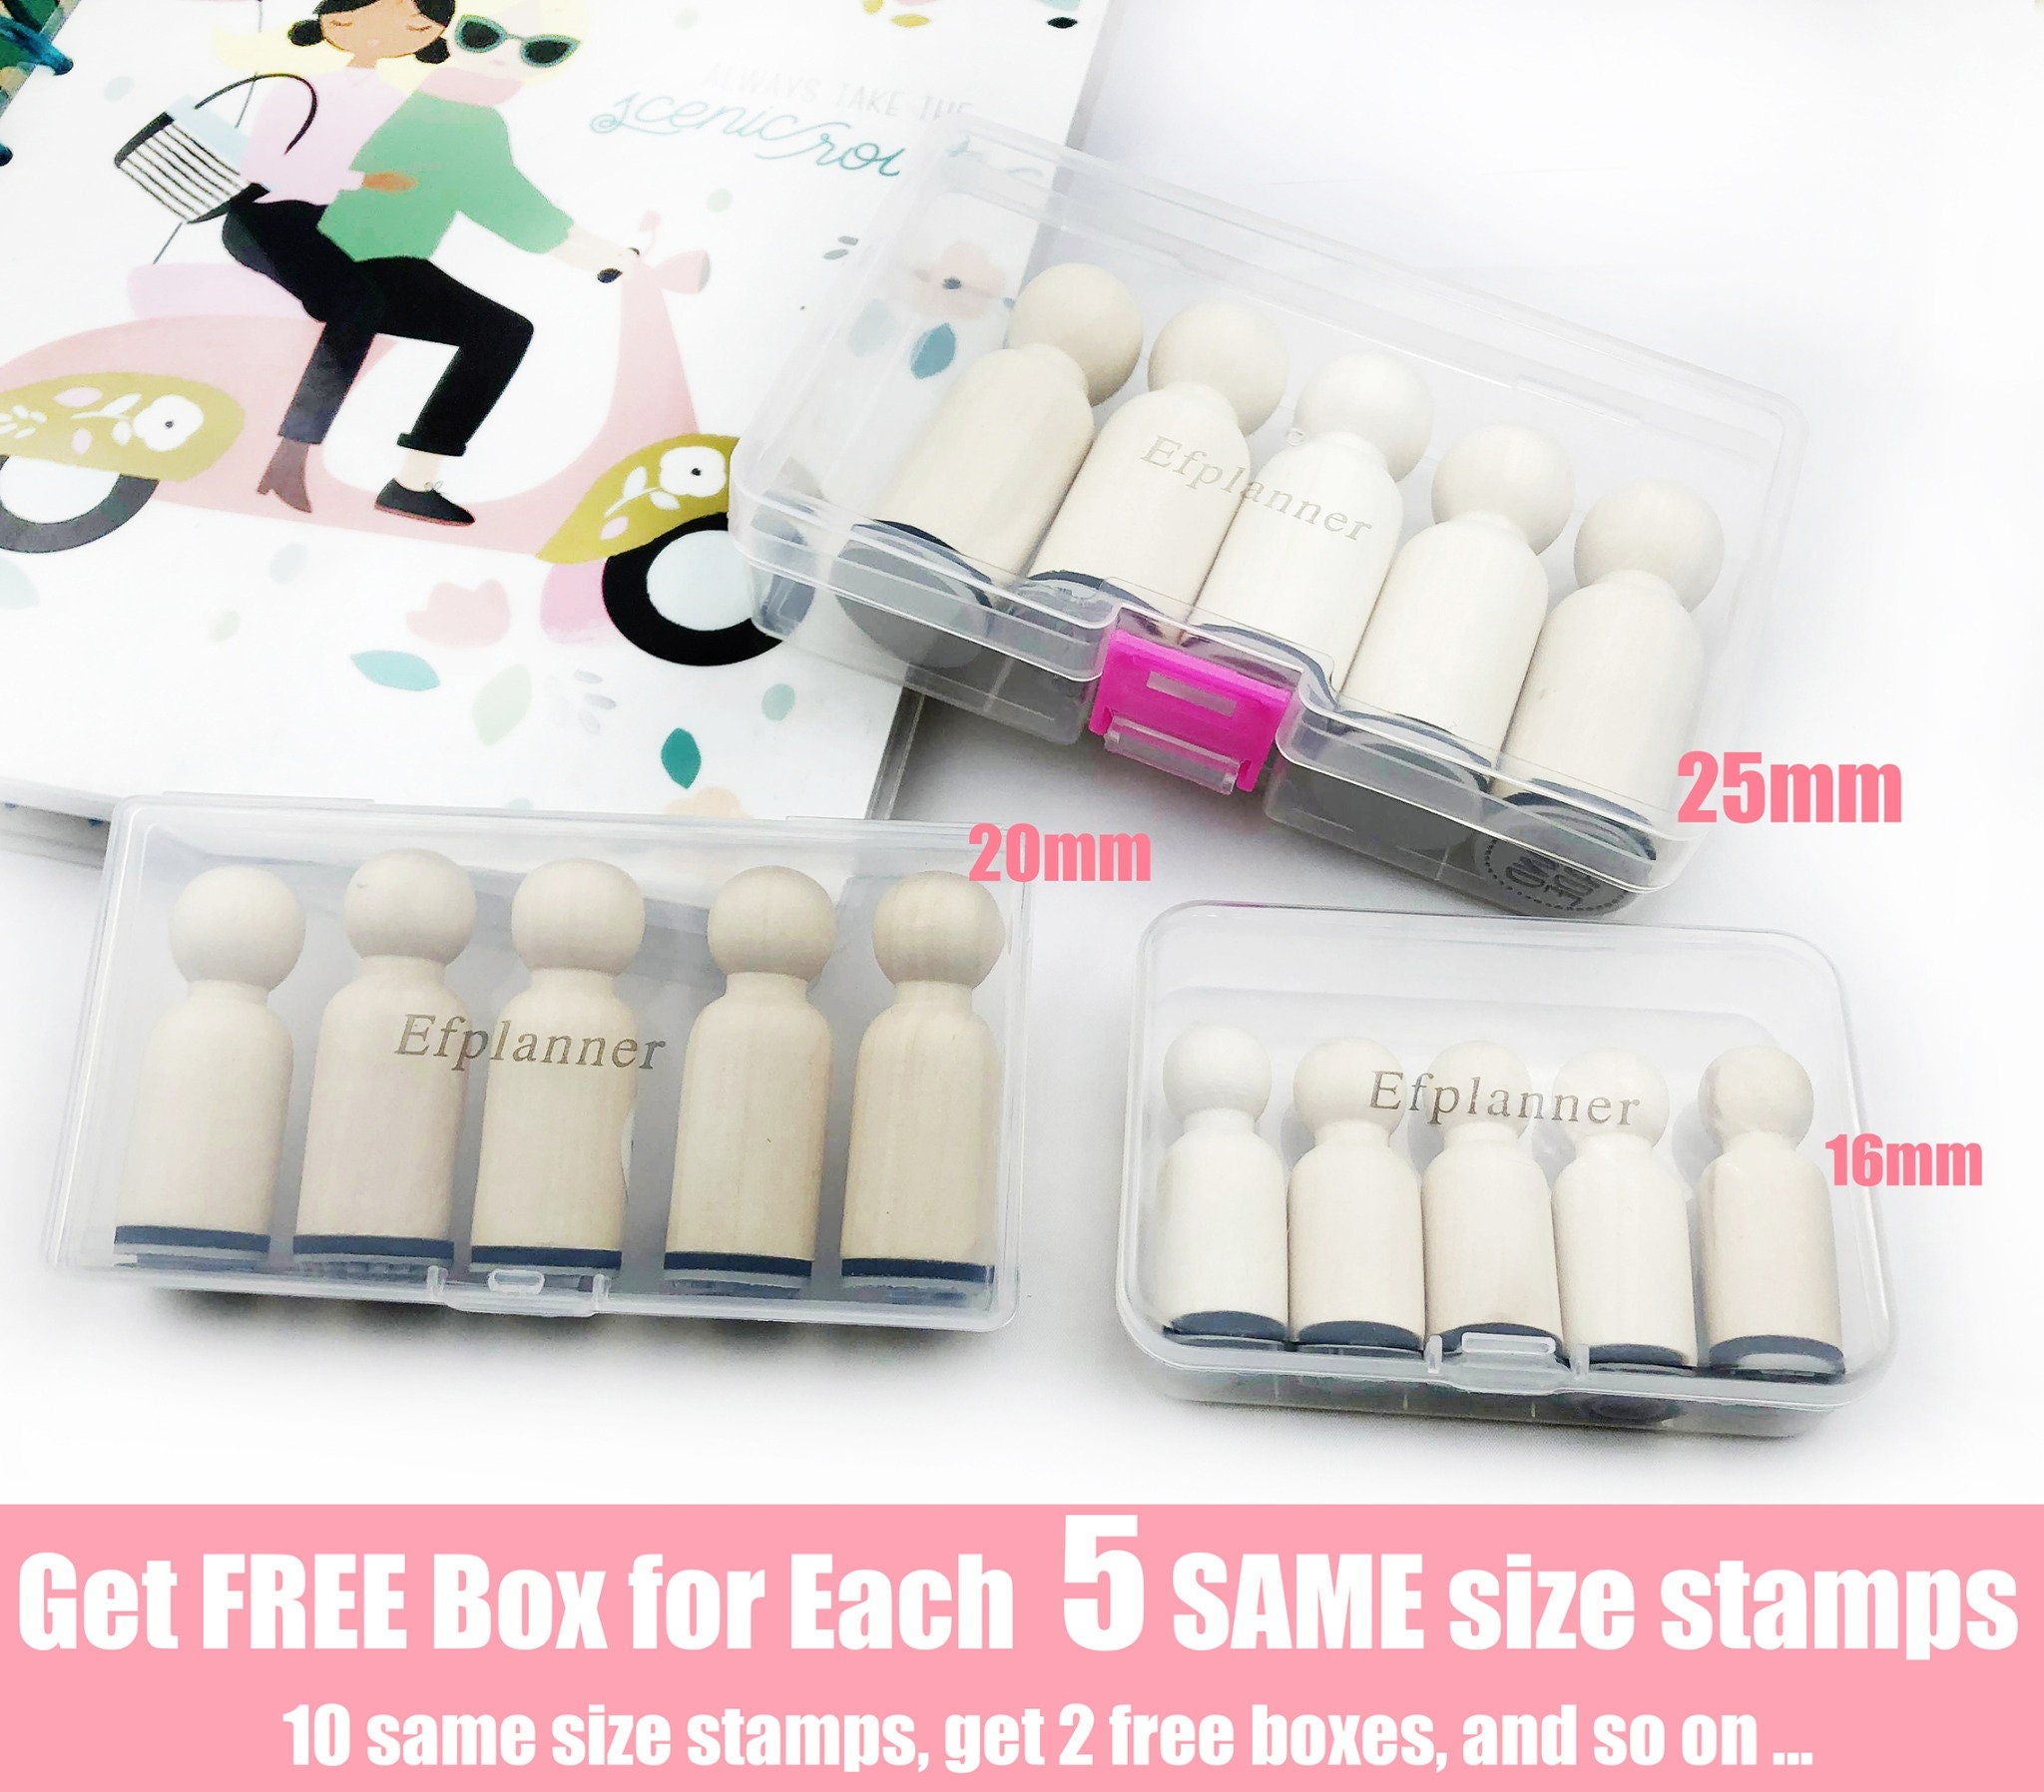 16mm Planner Stamp Cute Signature Stamp Signature Rubber Stamp 20mm Mini Stamps S958 Contract Stamp